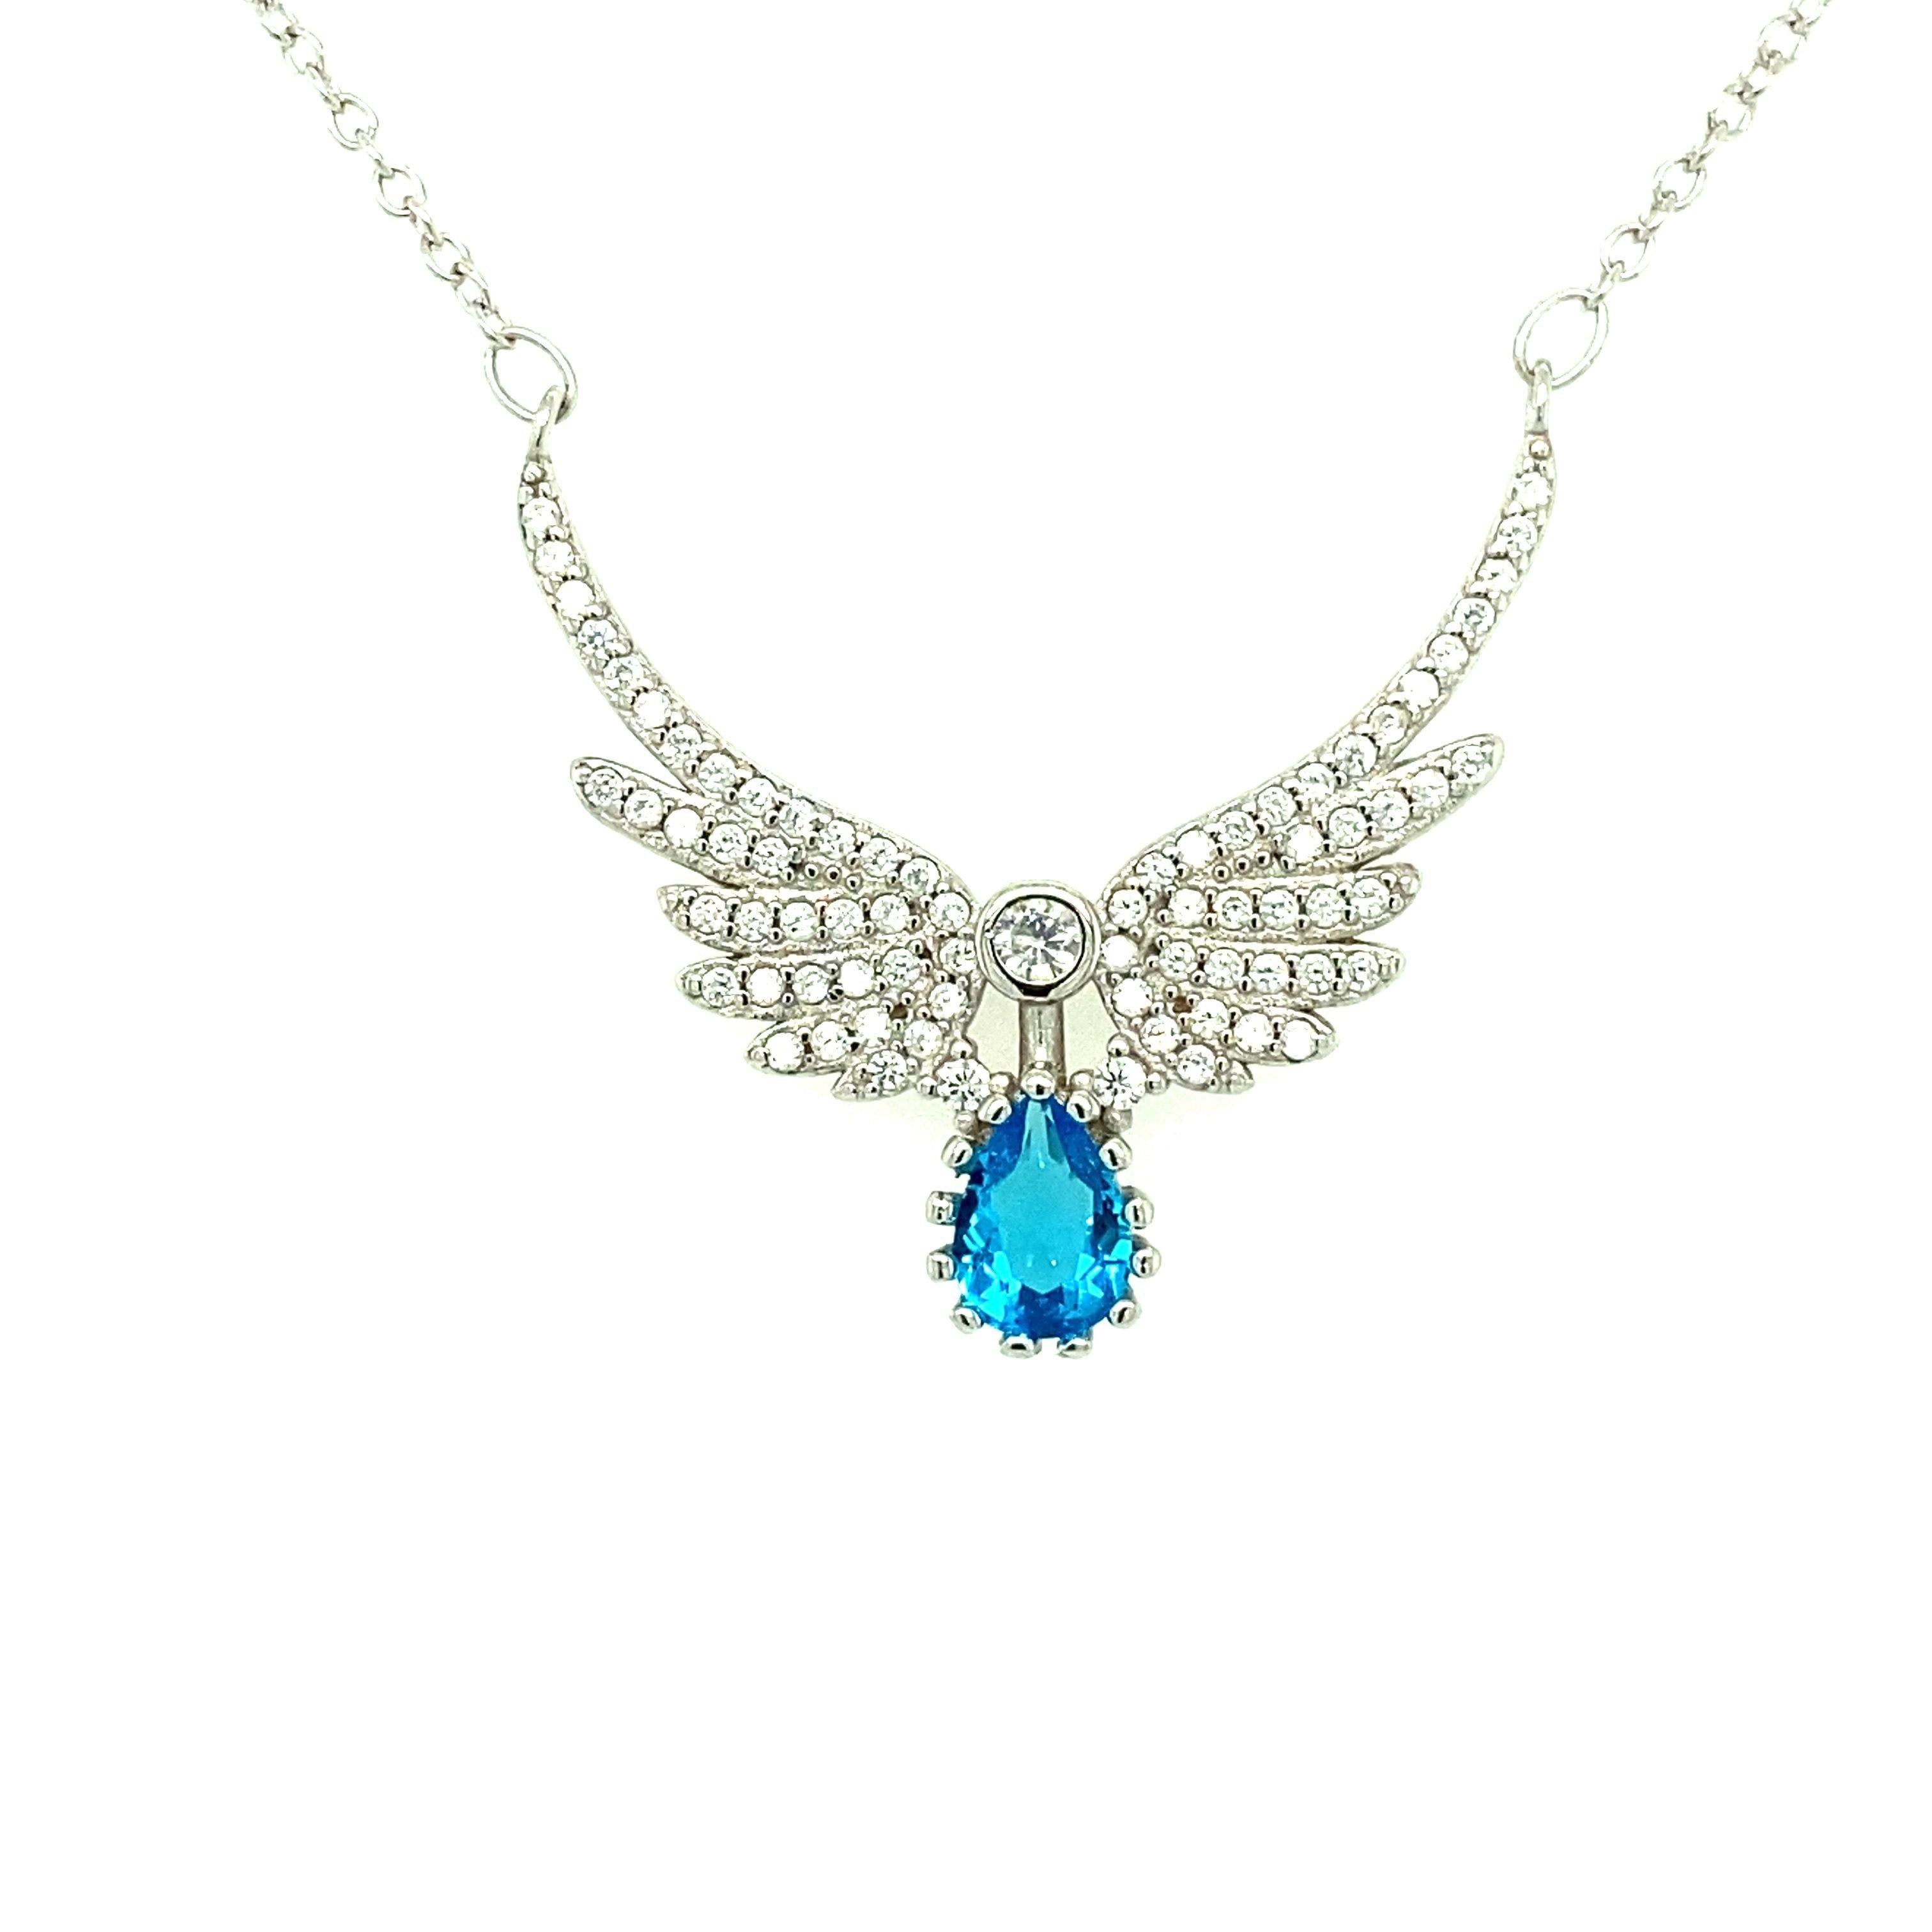 Asfour-Crystal-accessories-Necklace-n1629-925-Sterling-Silver